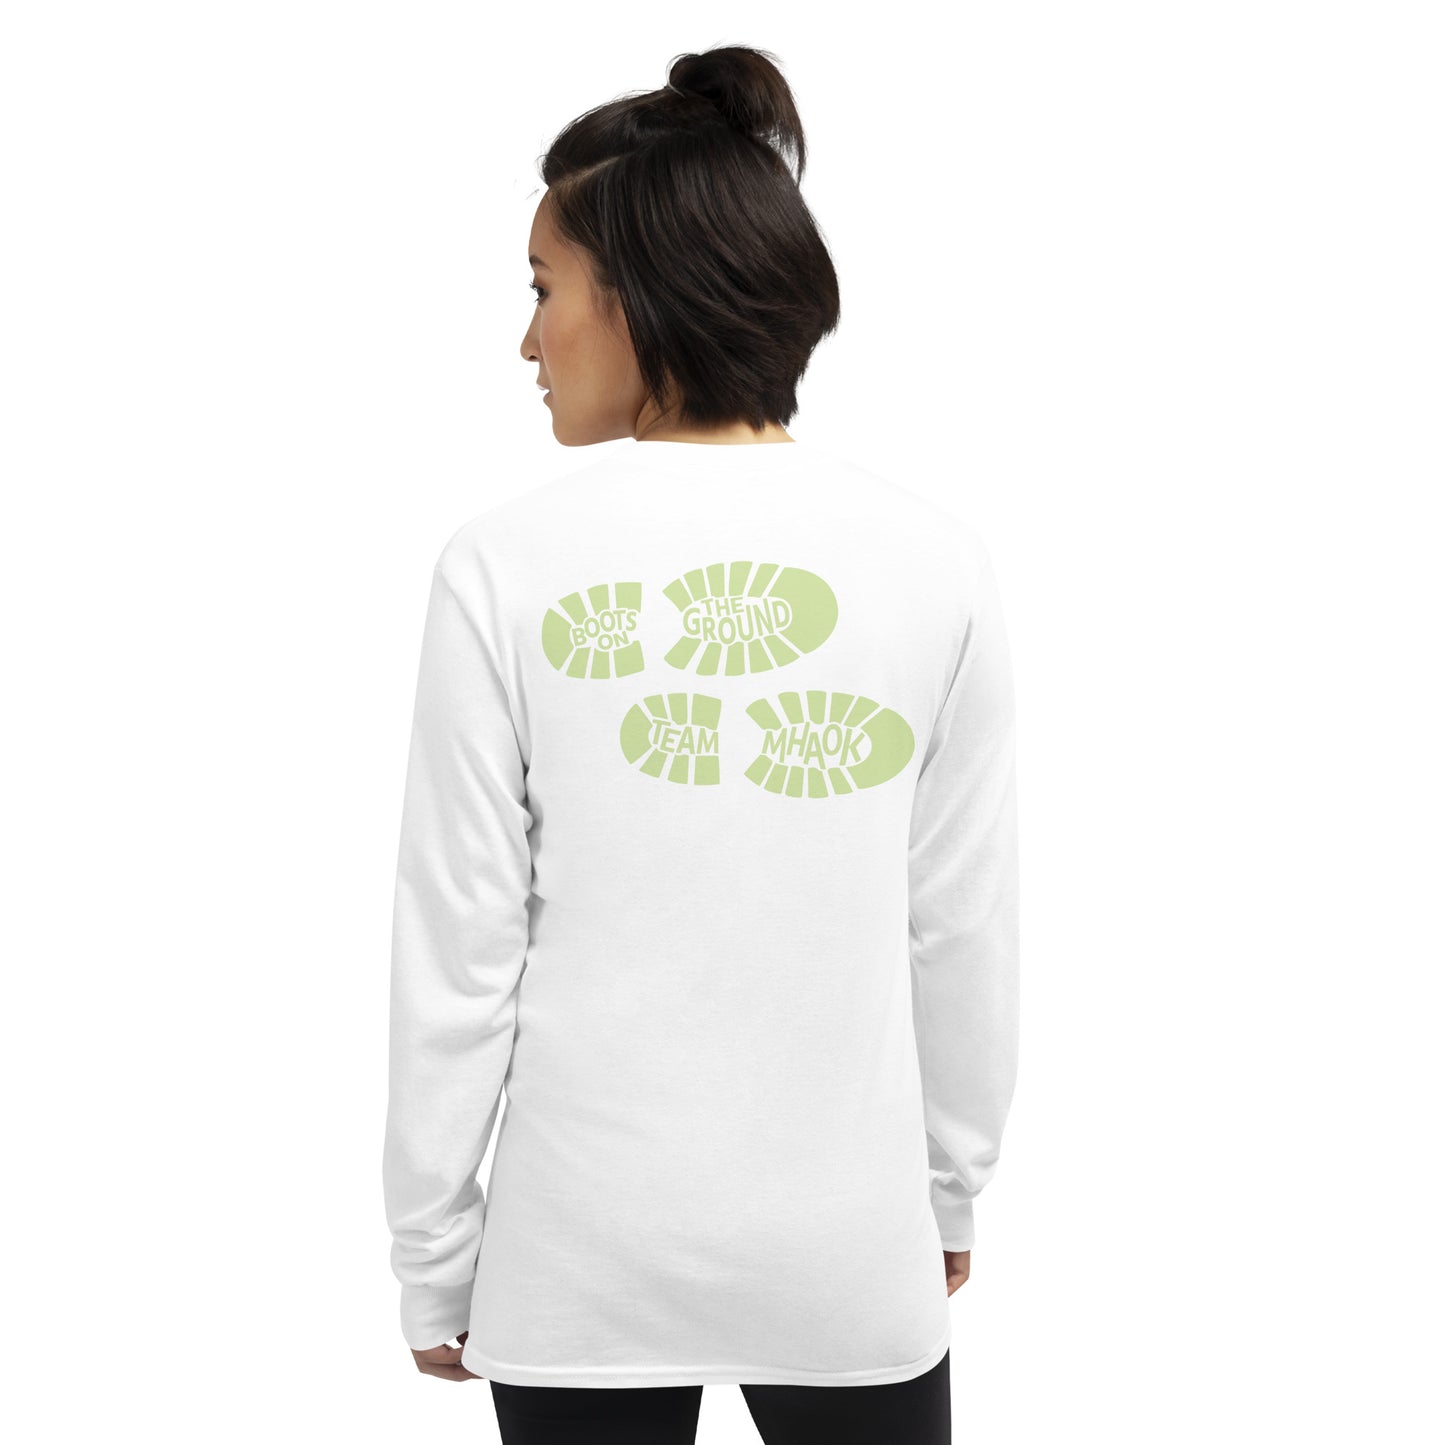 Boots on the Ground Unisex Long Sleeve Shirt